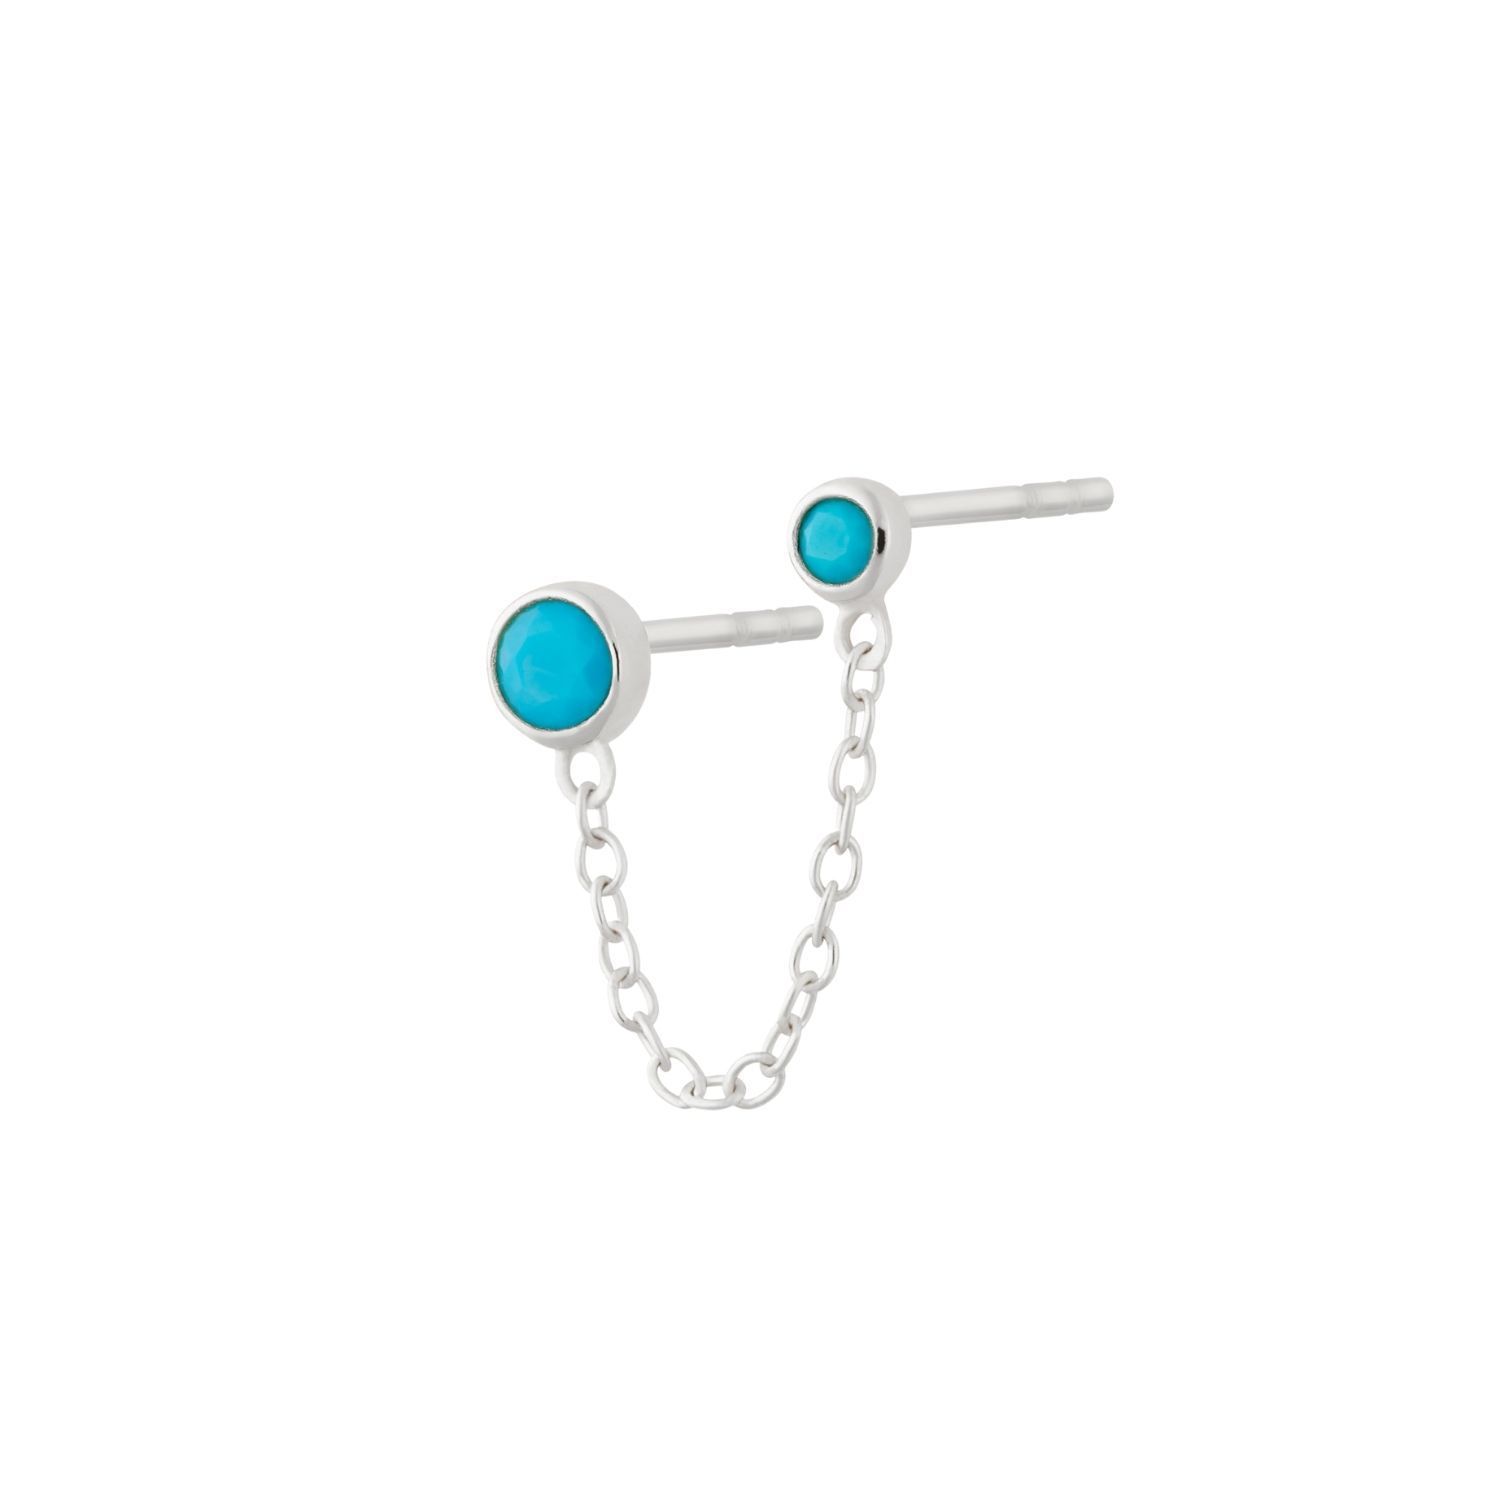 Turquoise Double Stud Single Earring with Chain Connector